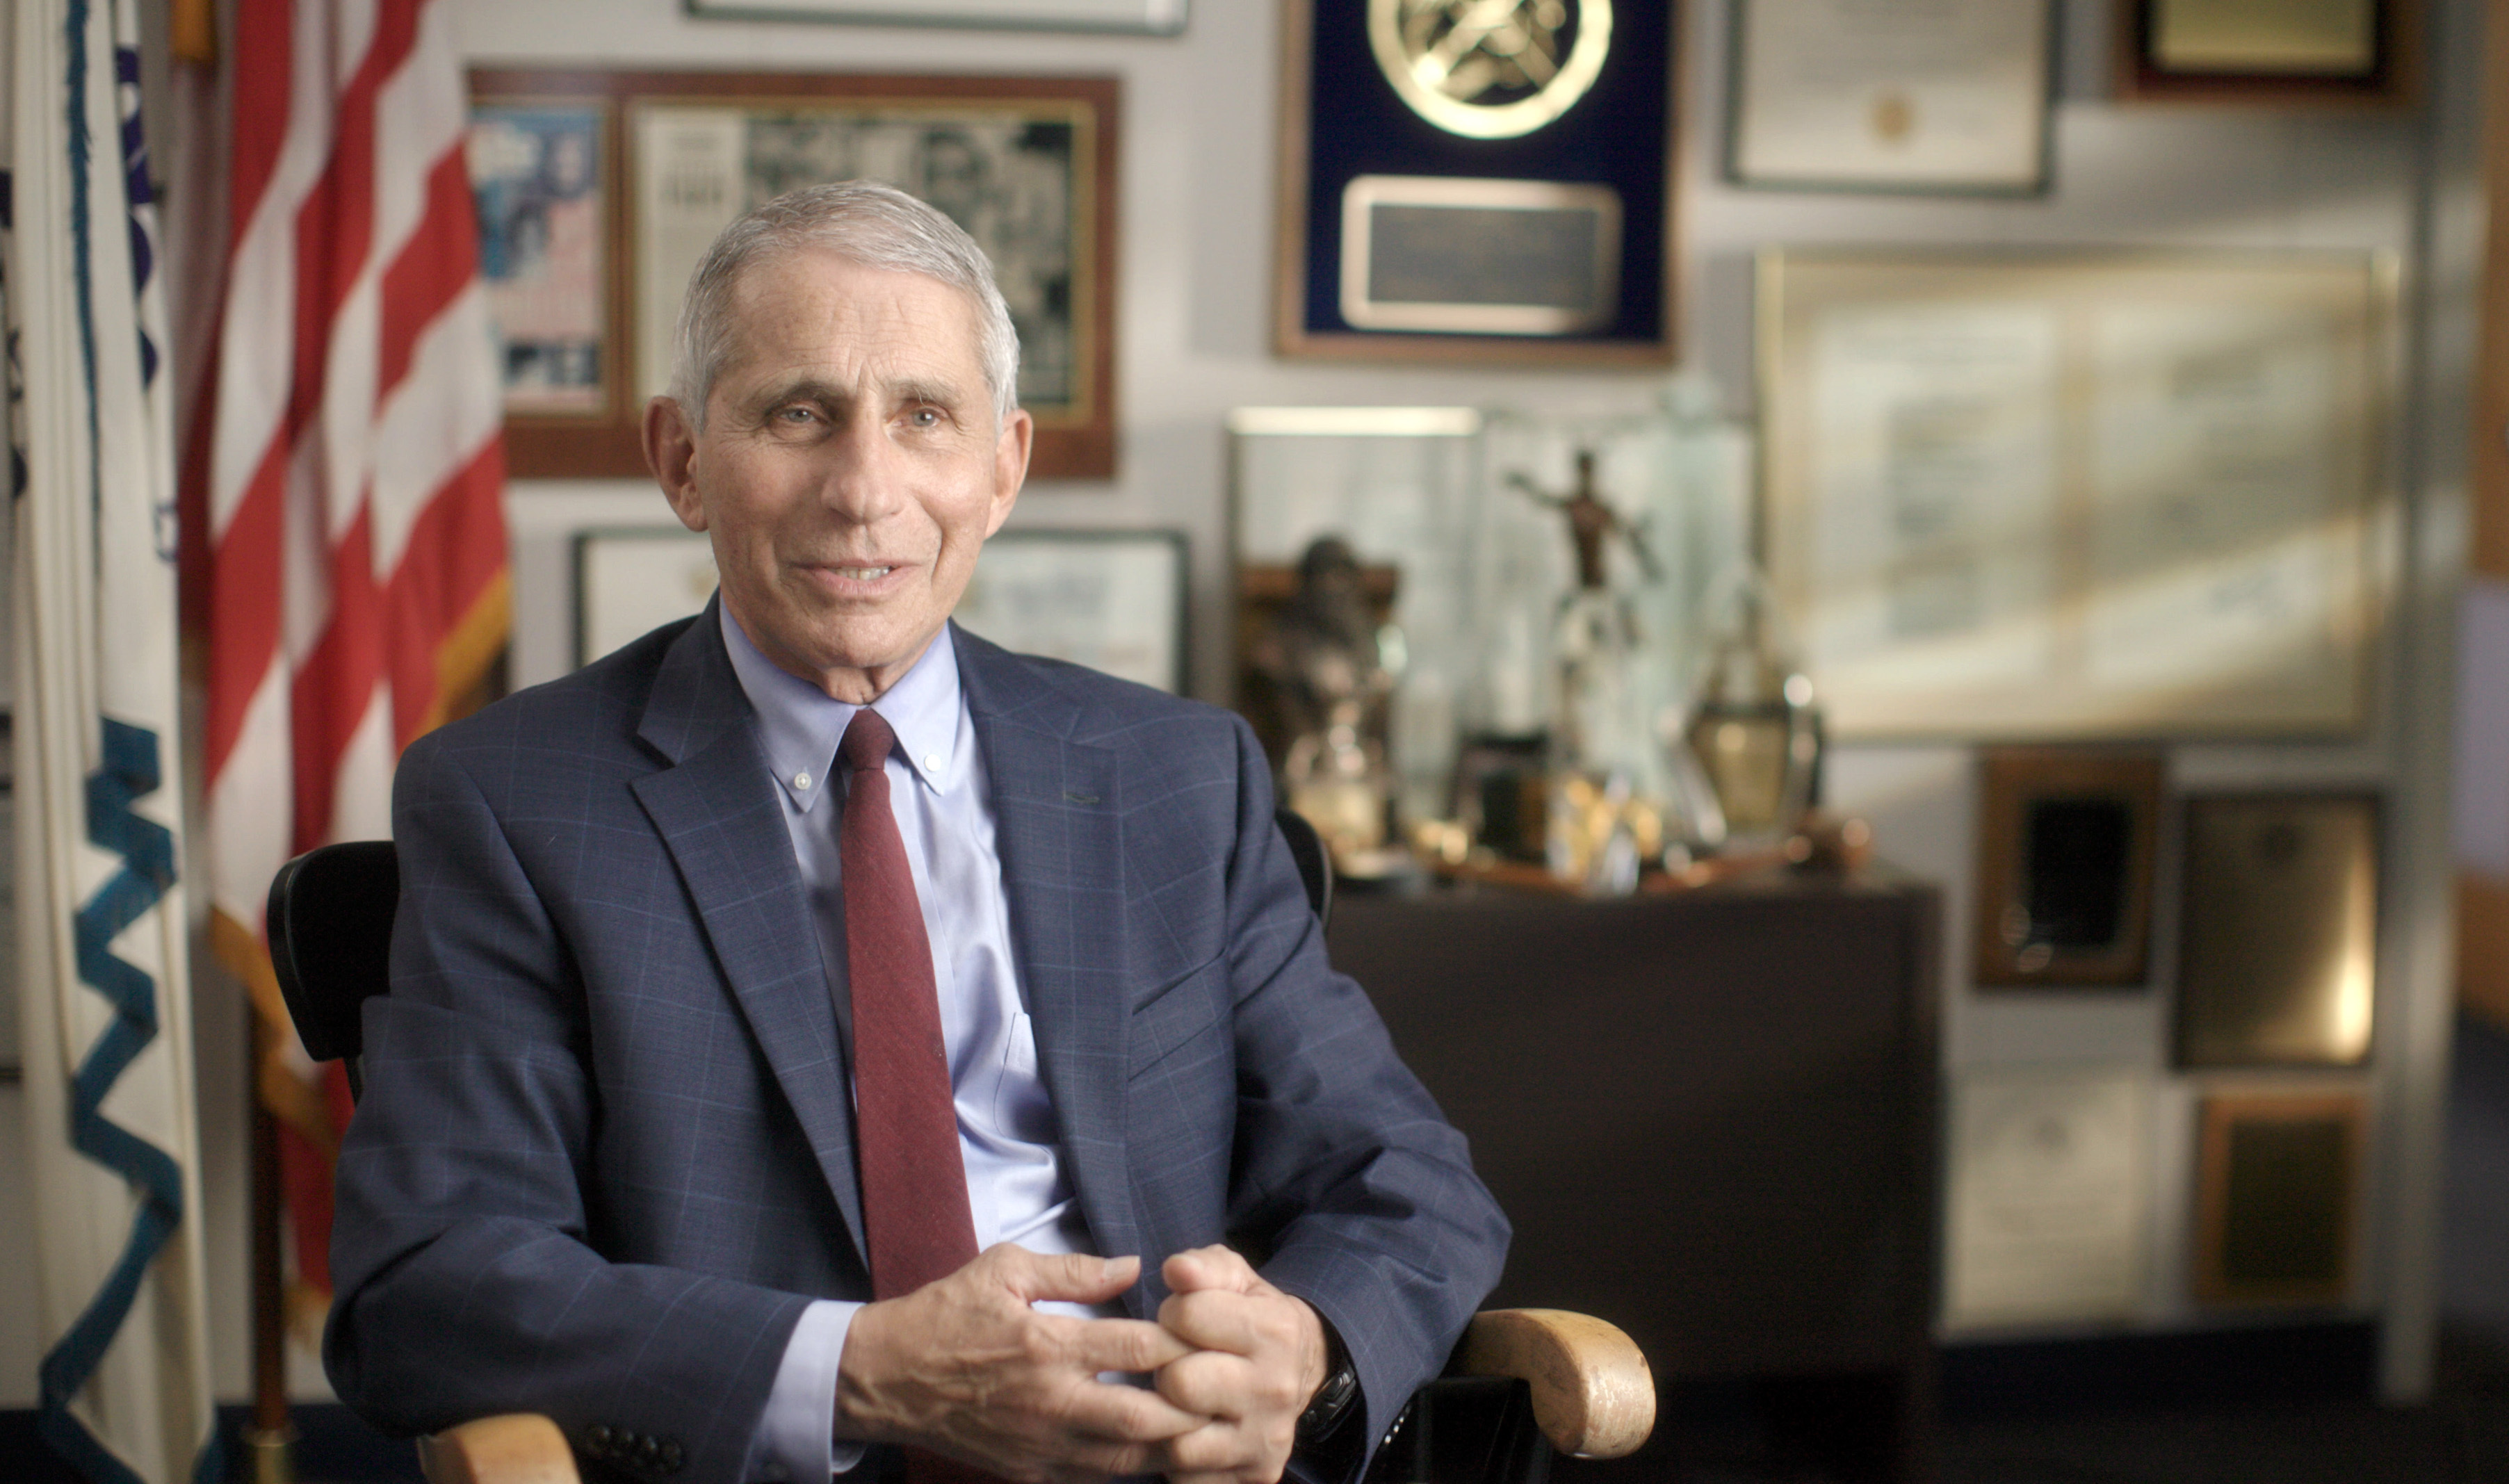 How many kids does Dr Fauci have? The US Sun